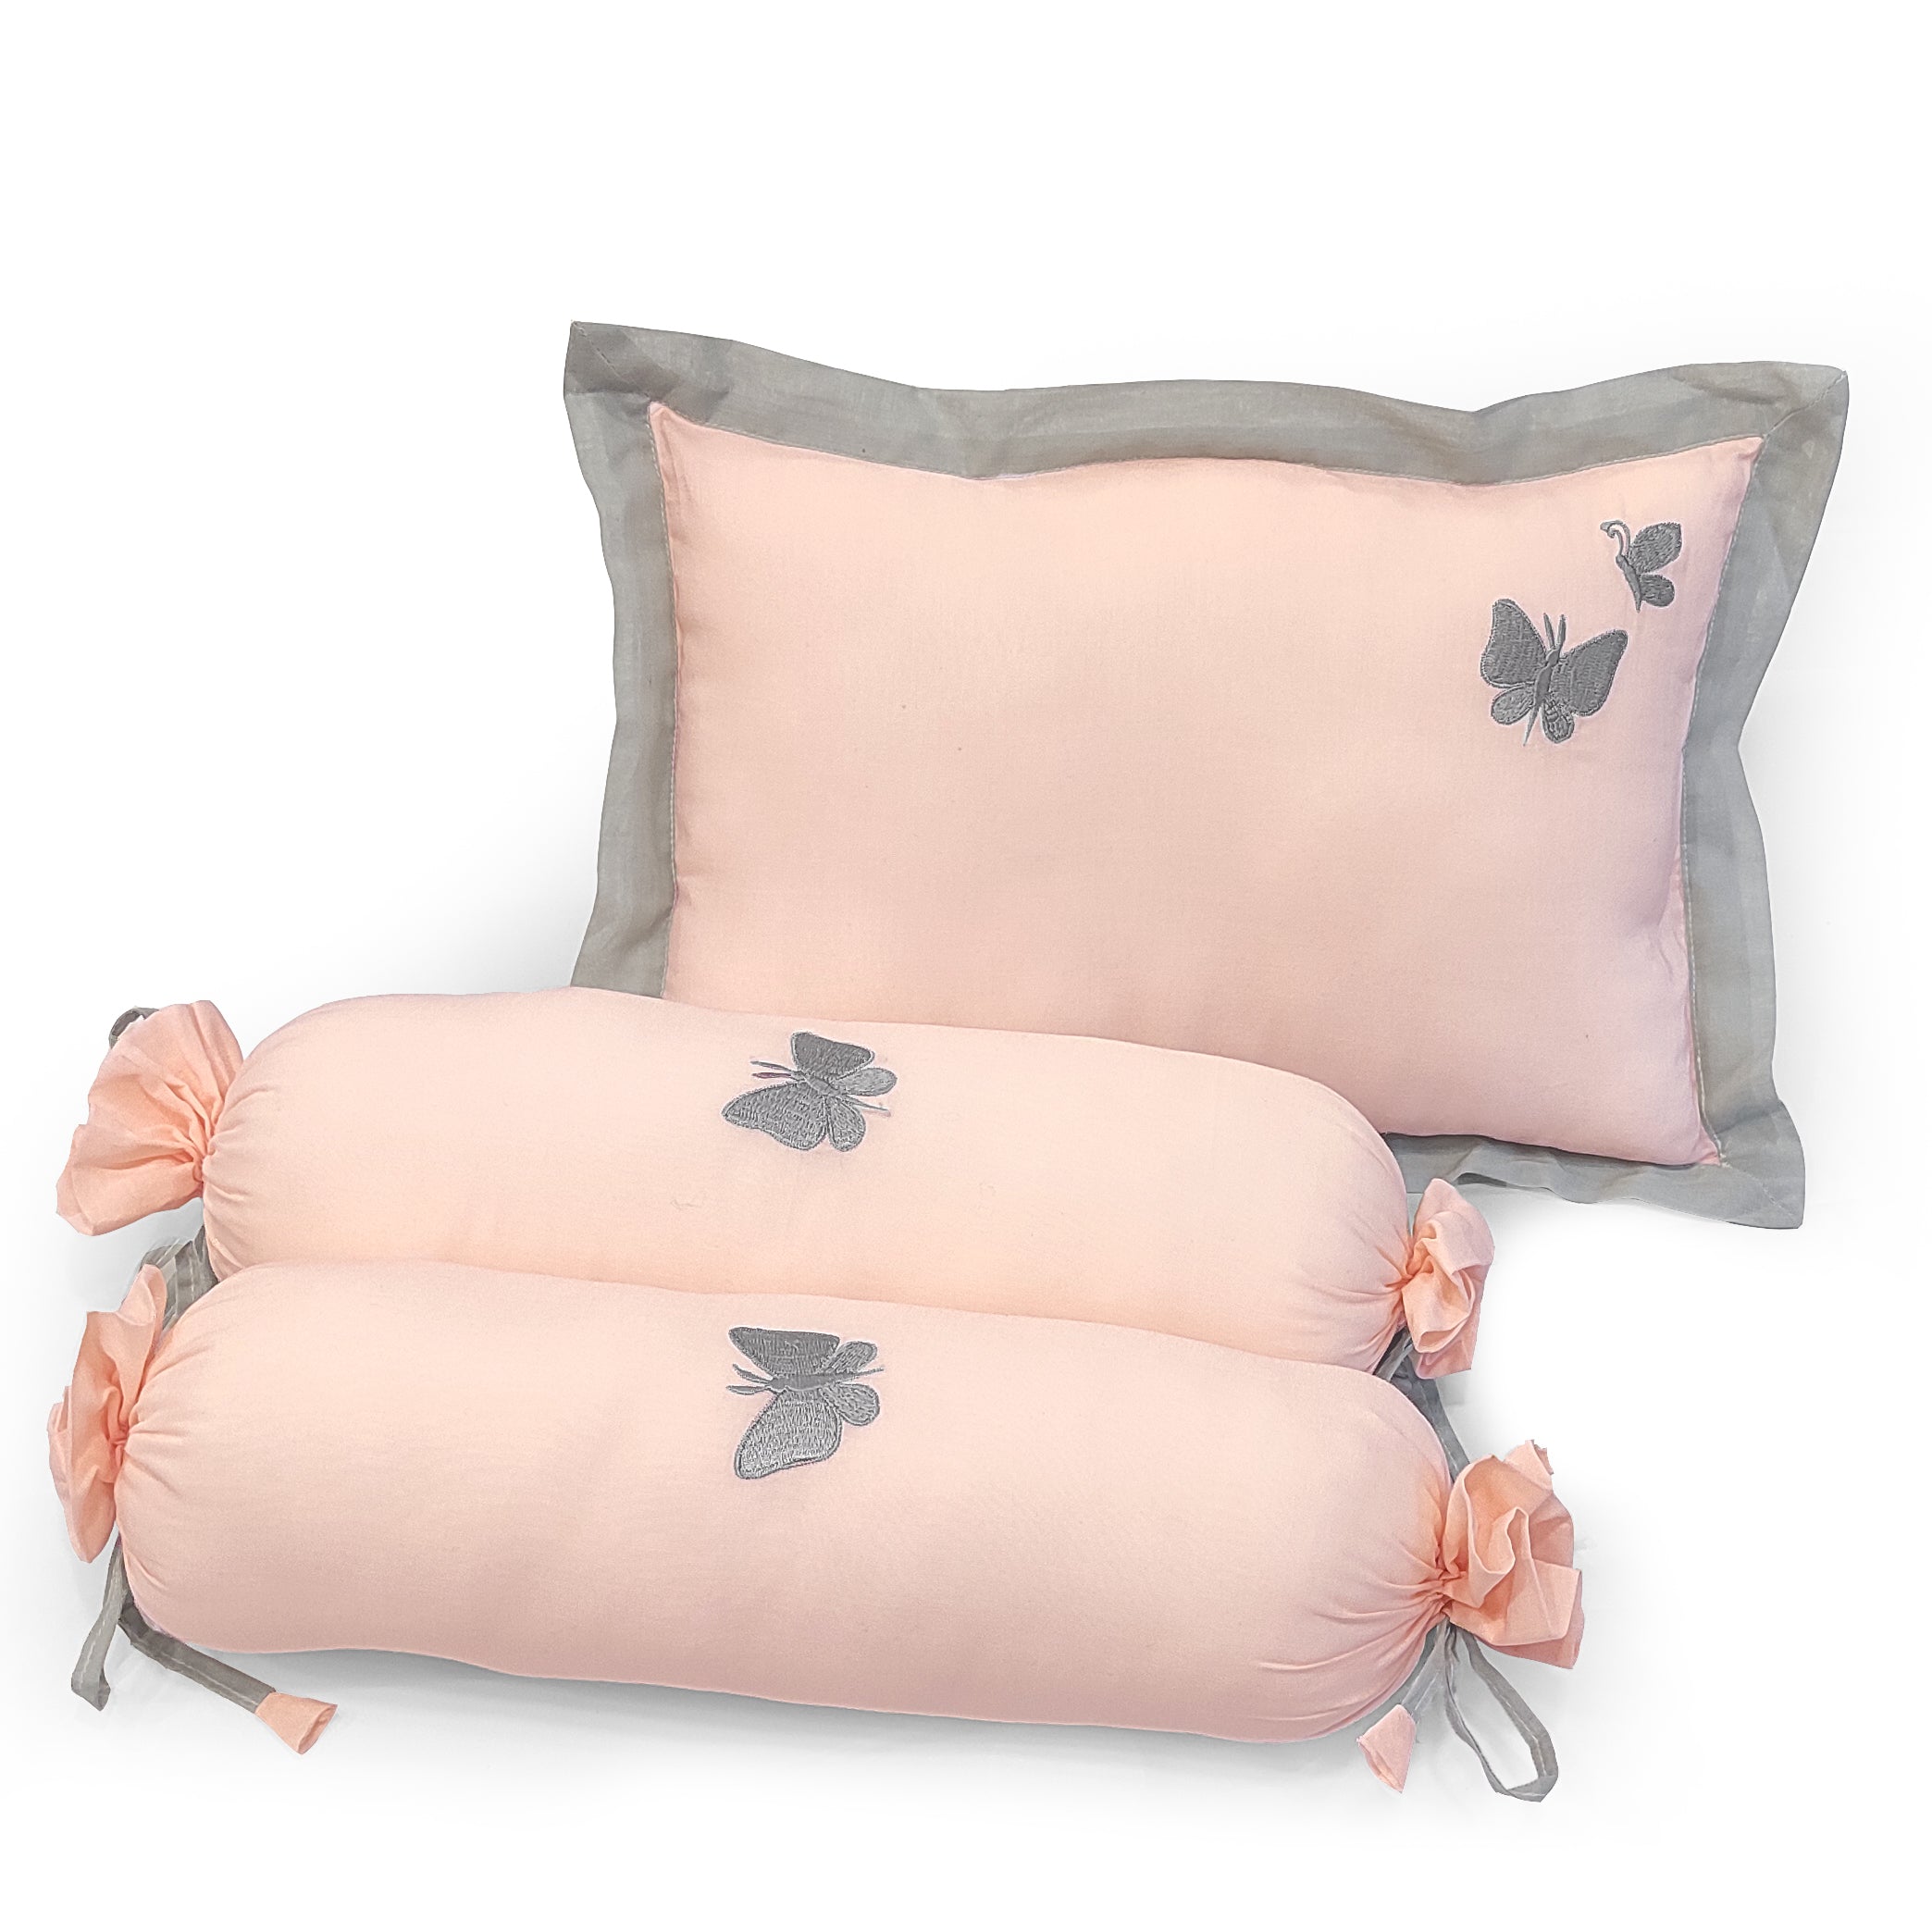 The White Cradle Cot Pillow + 2 Bolsters Set with Fillers - Organic Cotton Fabric, Softest Fiber Filling, Protective Comfort - Butterfly